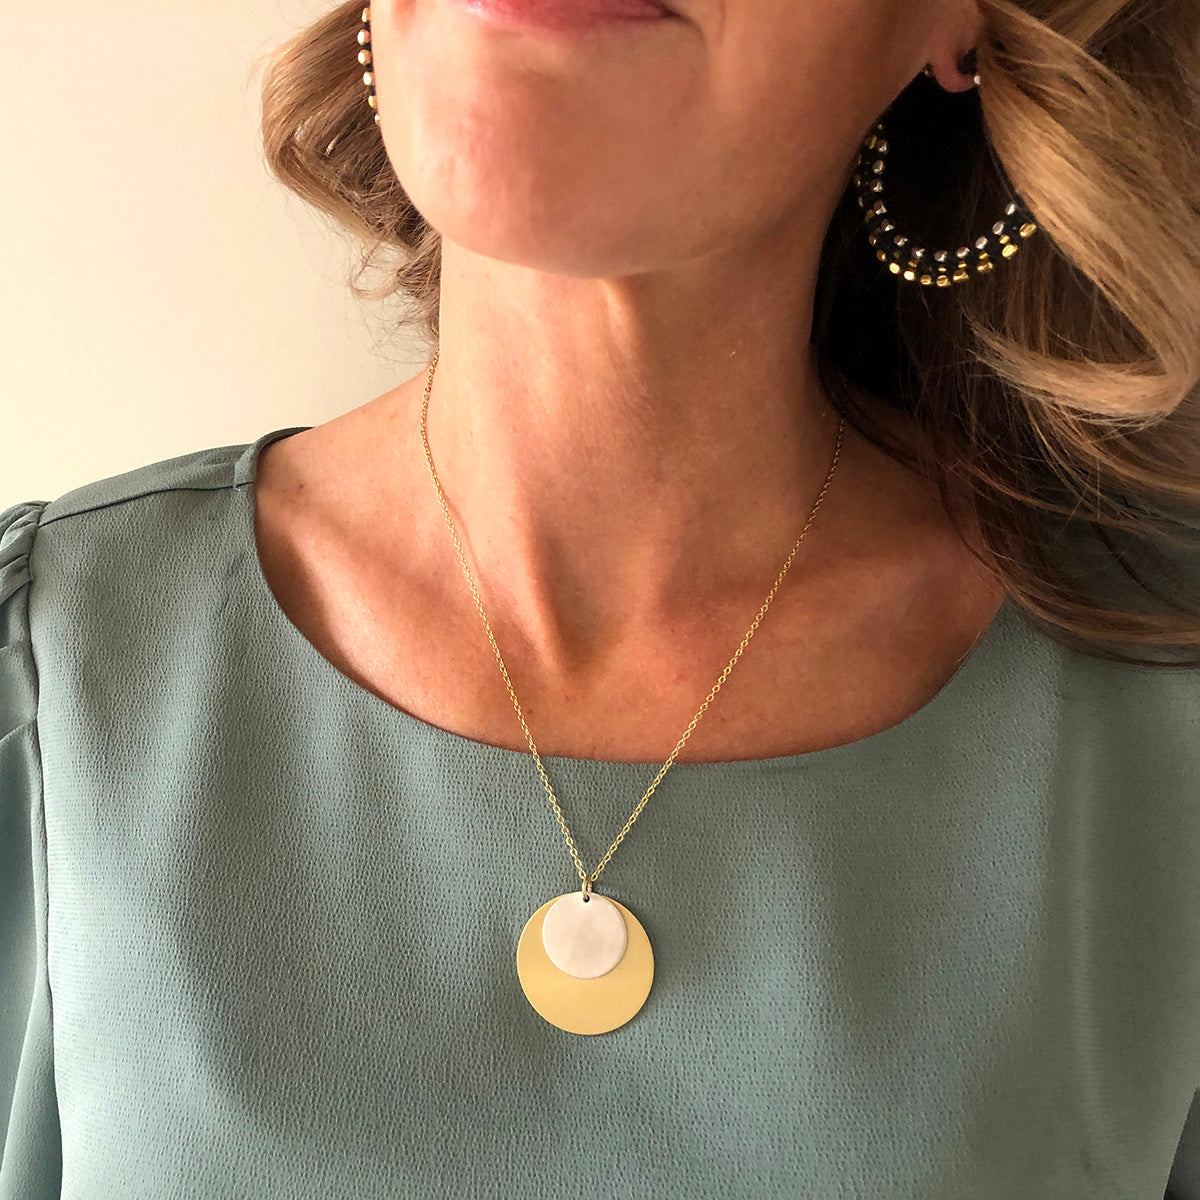 Load image into Gallery viewer, Eclipse Necklace
